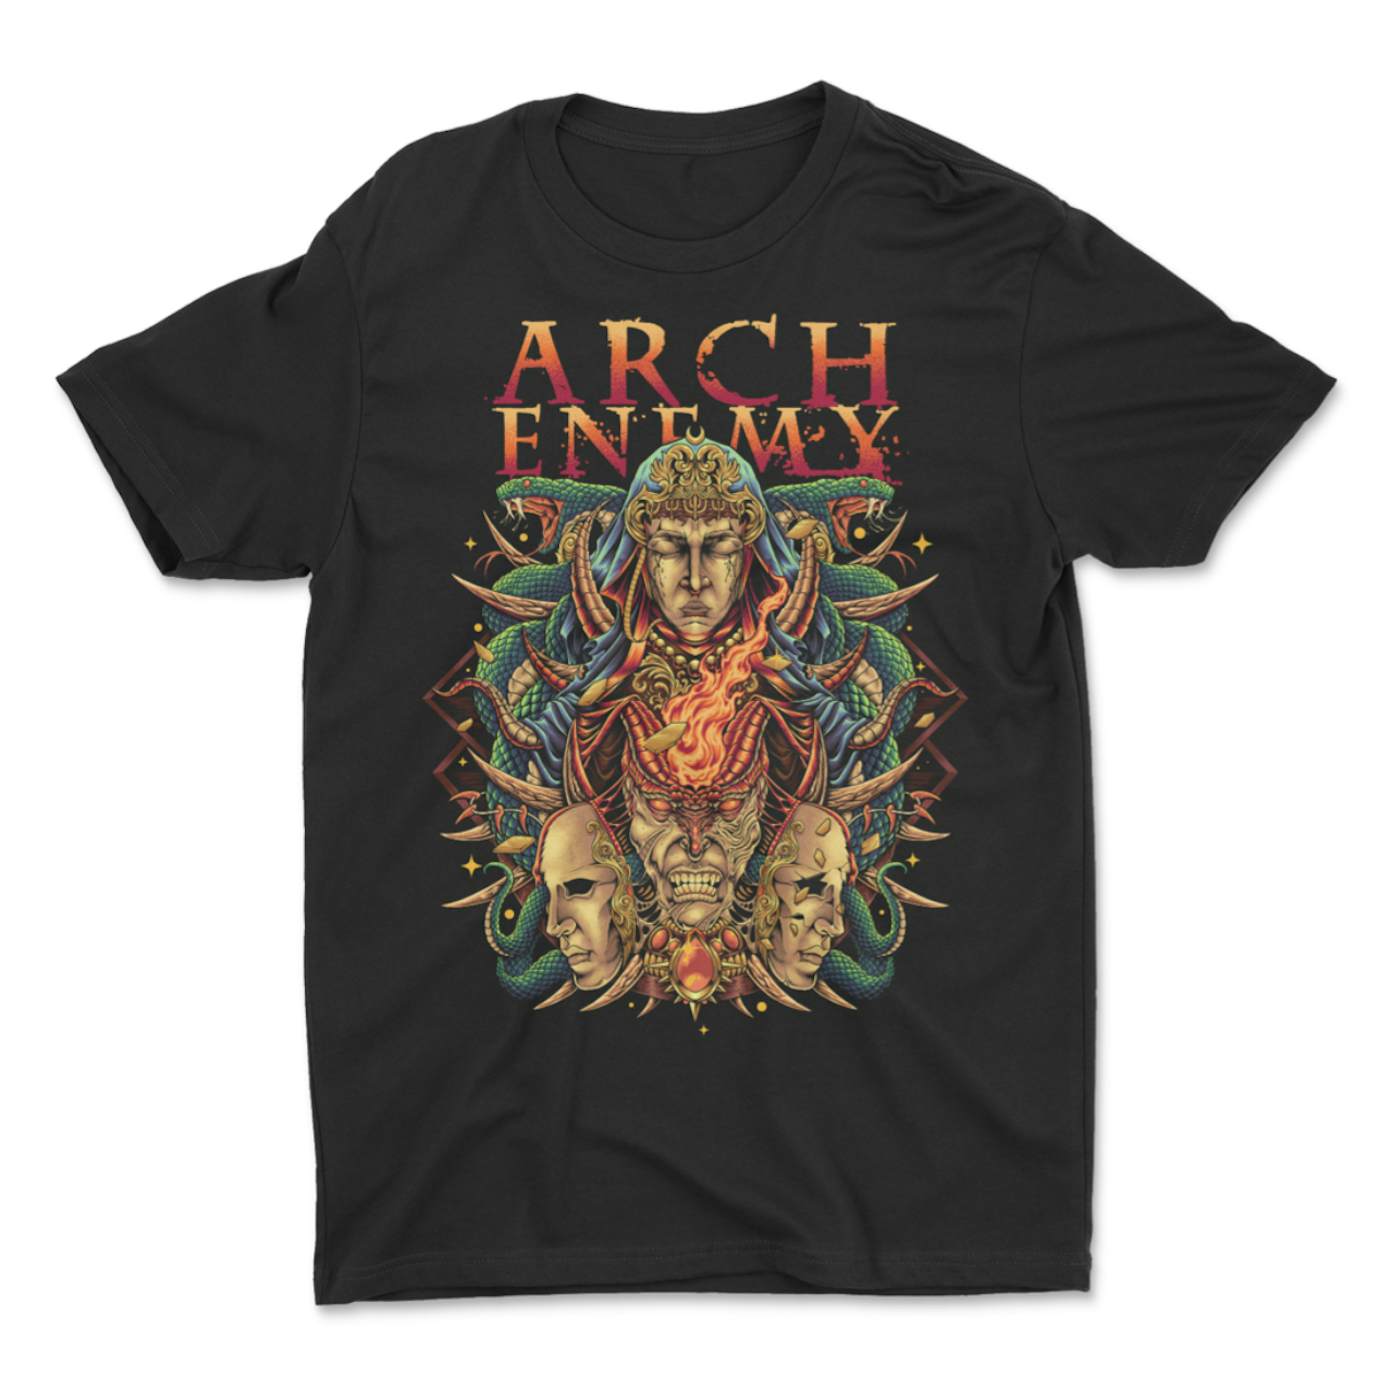 Arch Enemy "Deceivers" T-Shirt